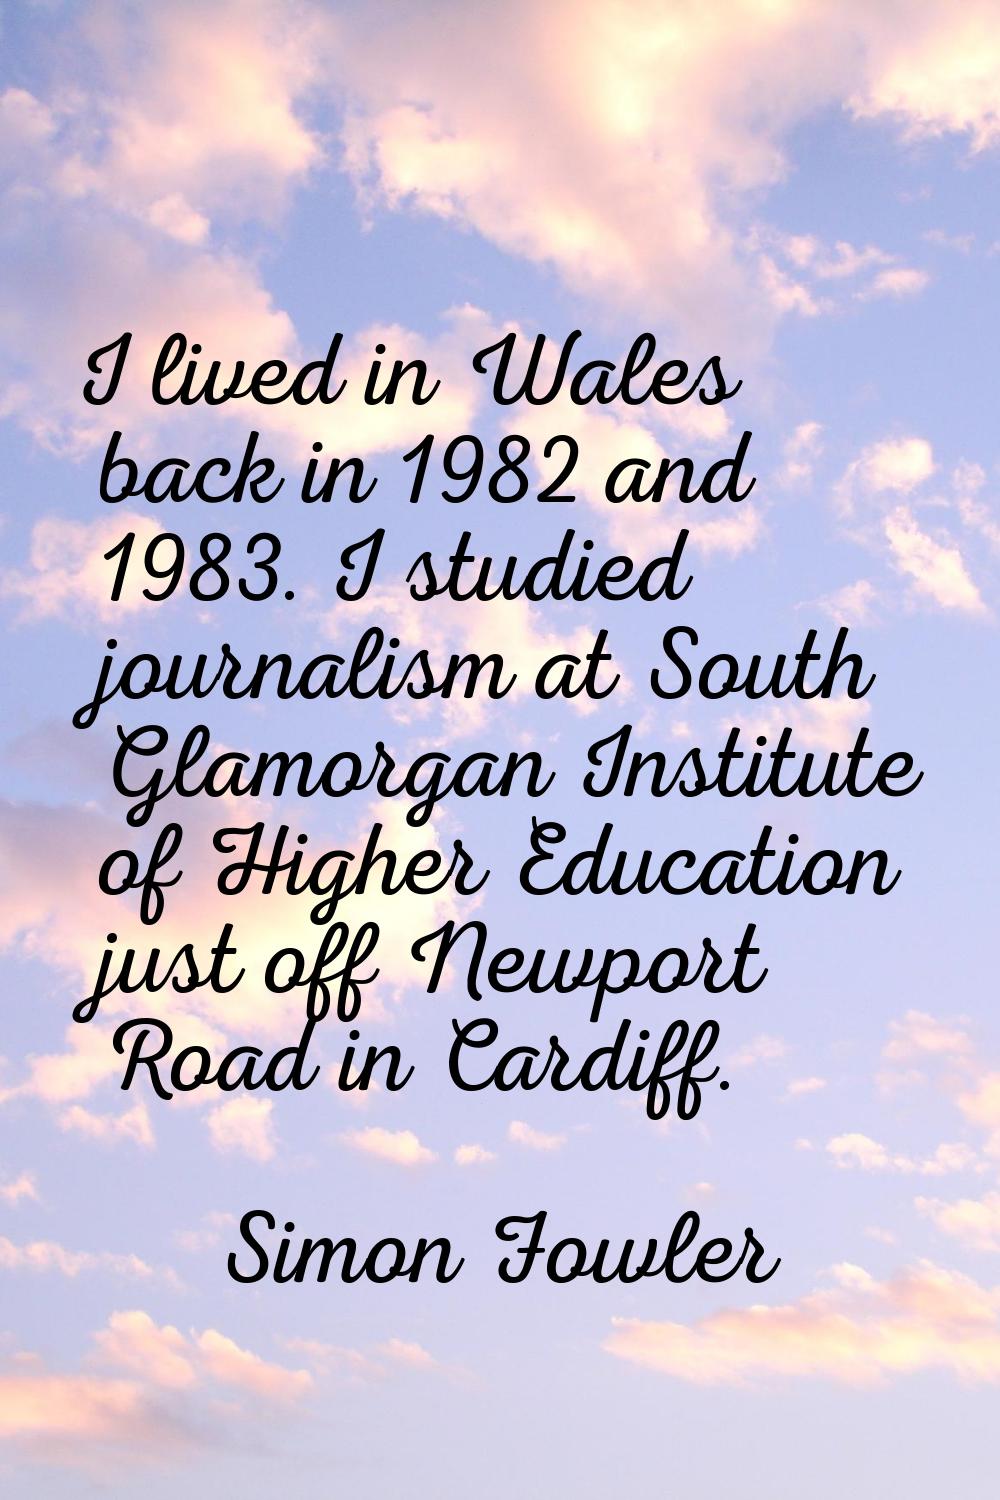 I lived in Wales back in 1982 and 1983. I studied journalism at South Glamorgan Institute of Higher